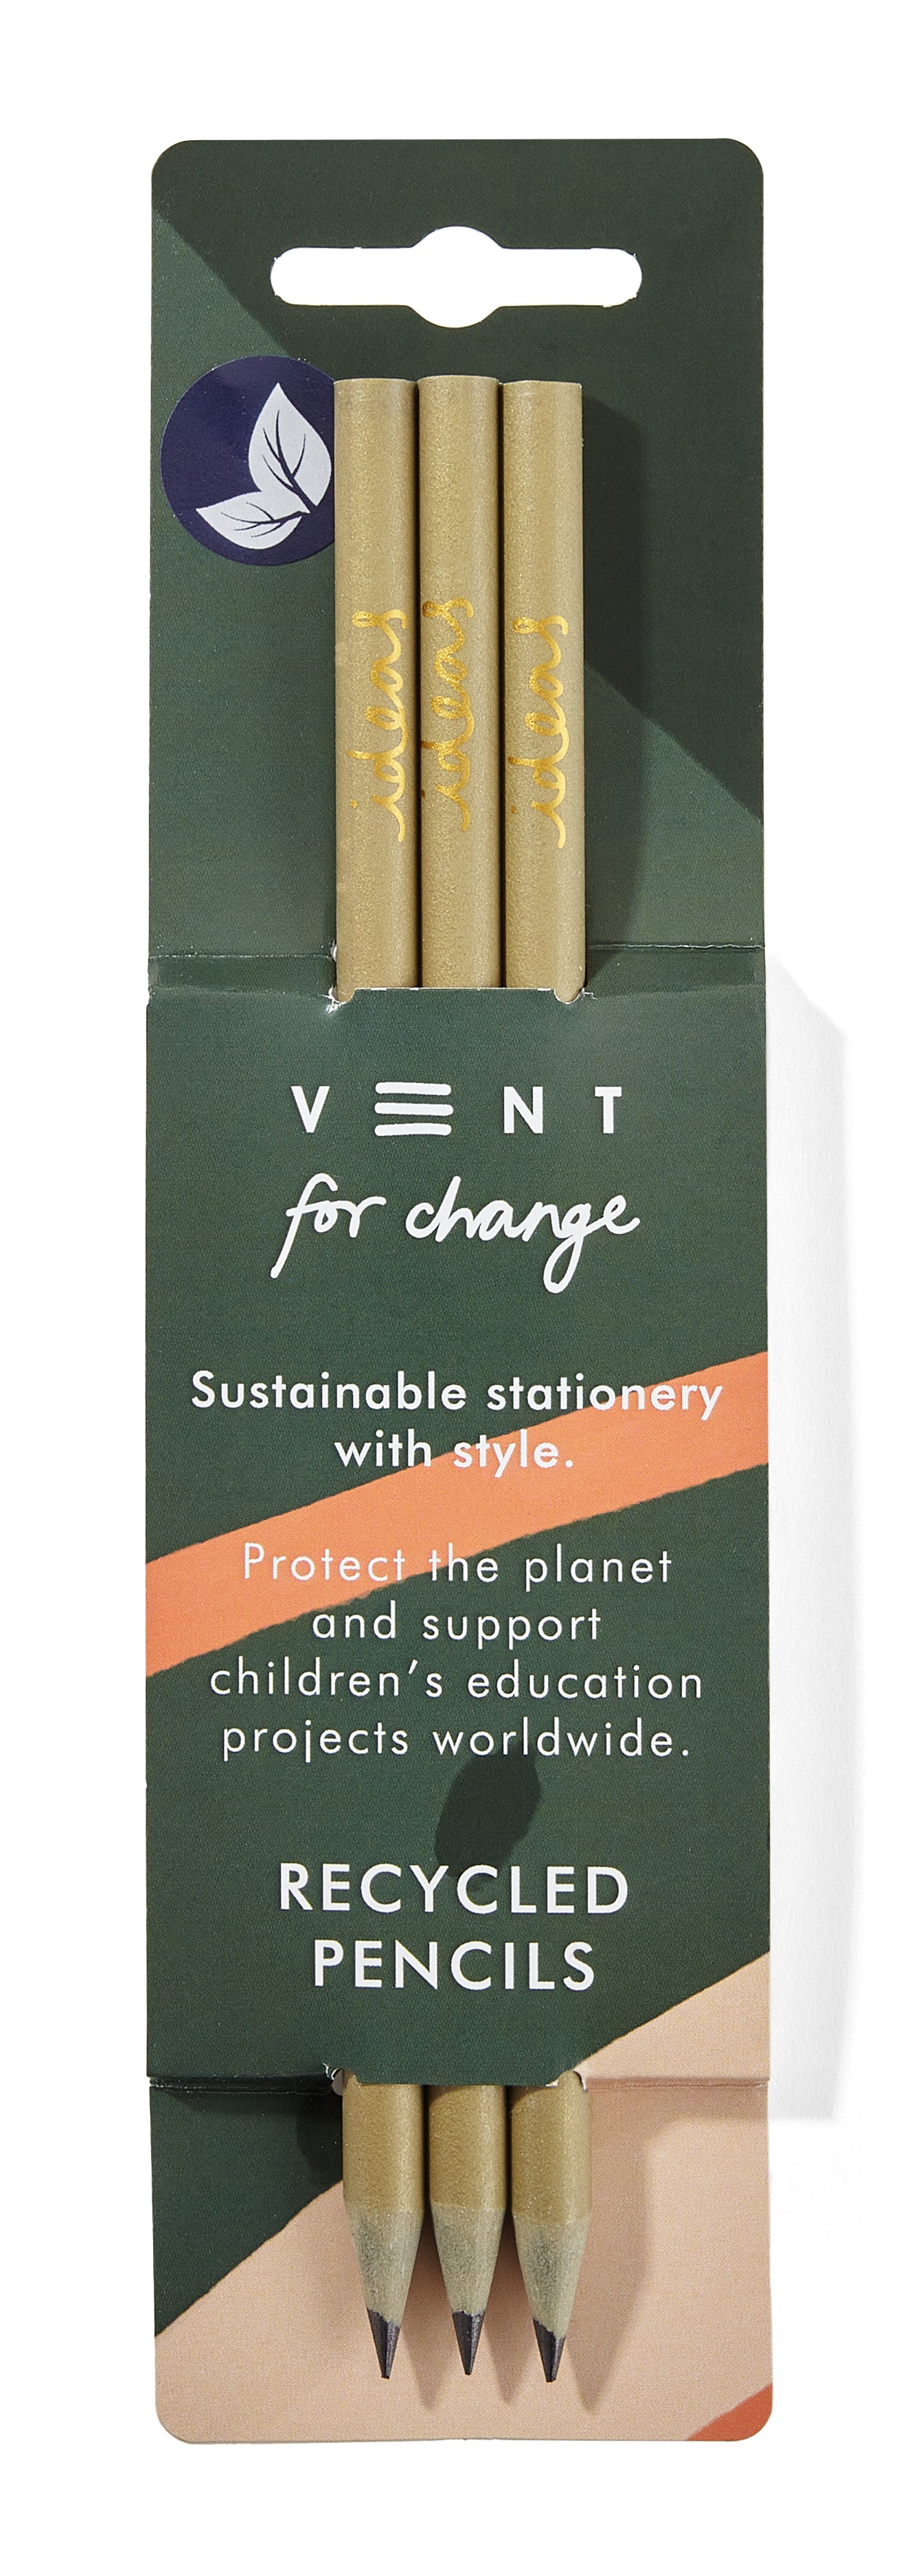 VENT for Change Pack of 3 recycled pencils - Ideas Gold & Green